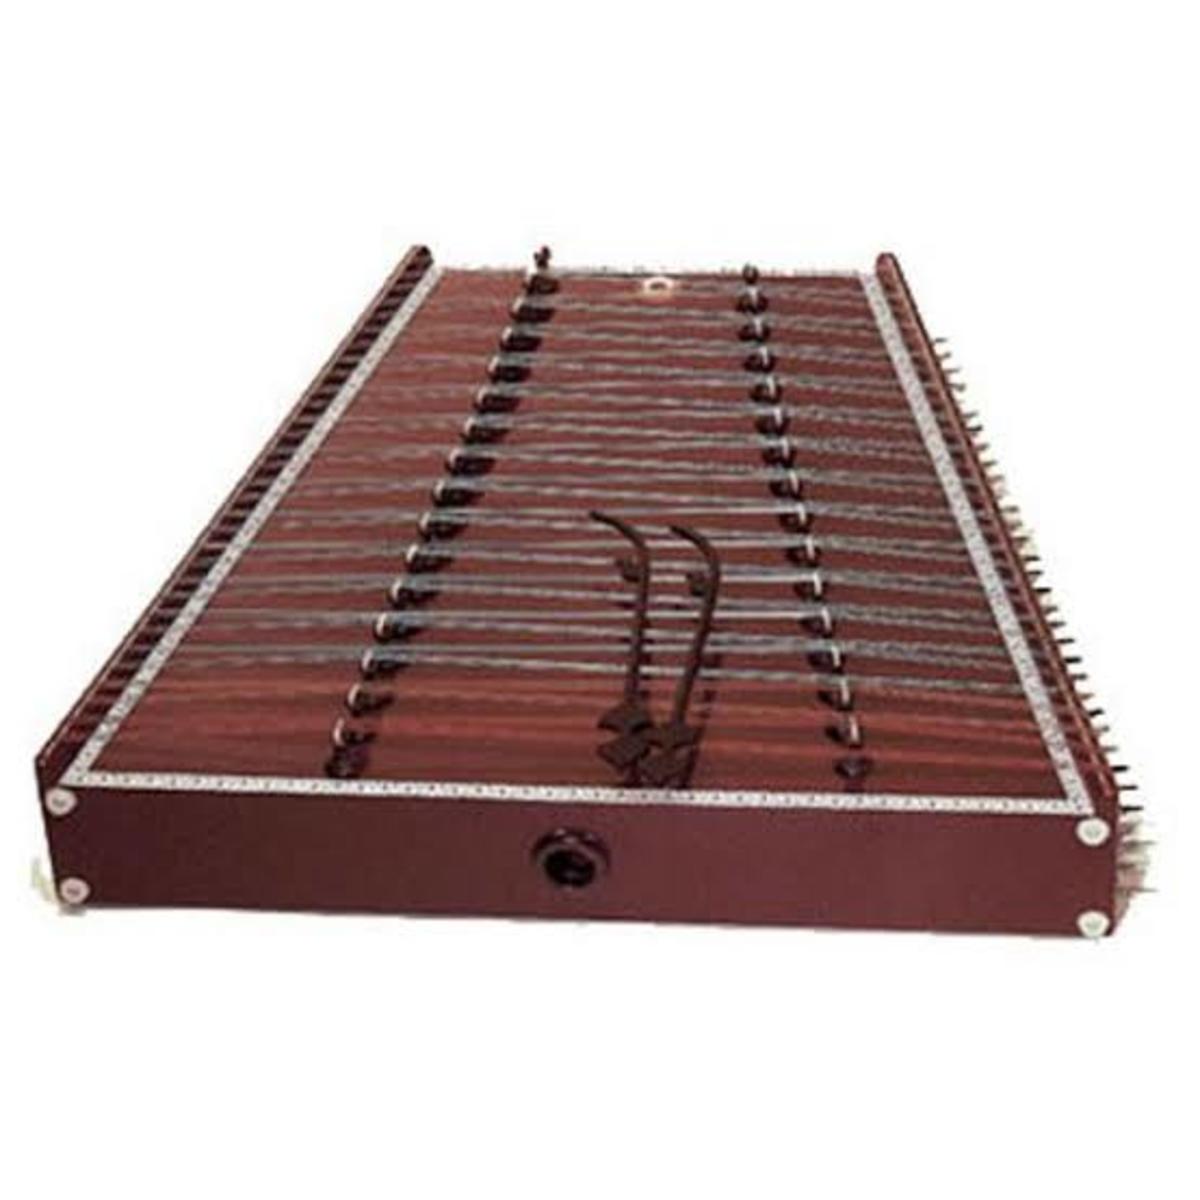 10 Traditional Indian Musical Instruments For Folk And Classical Music Hubpages 